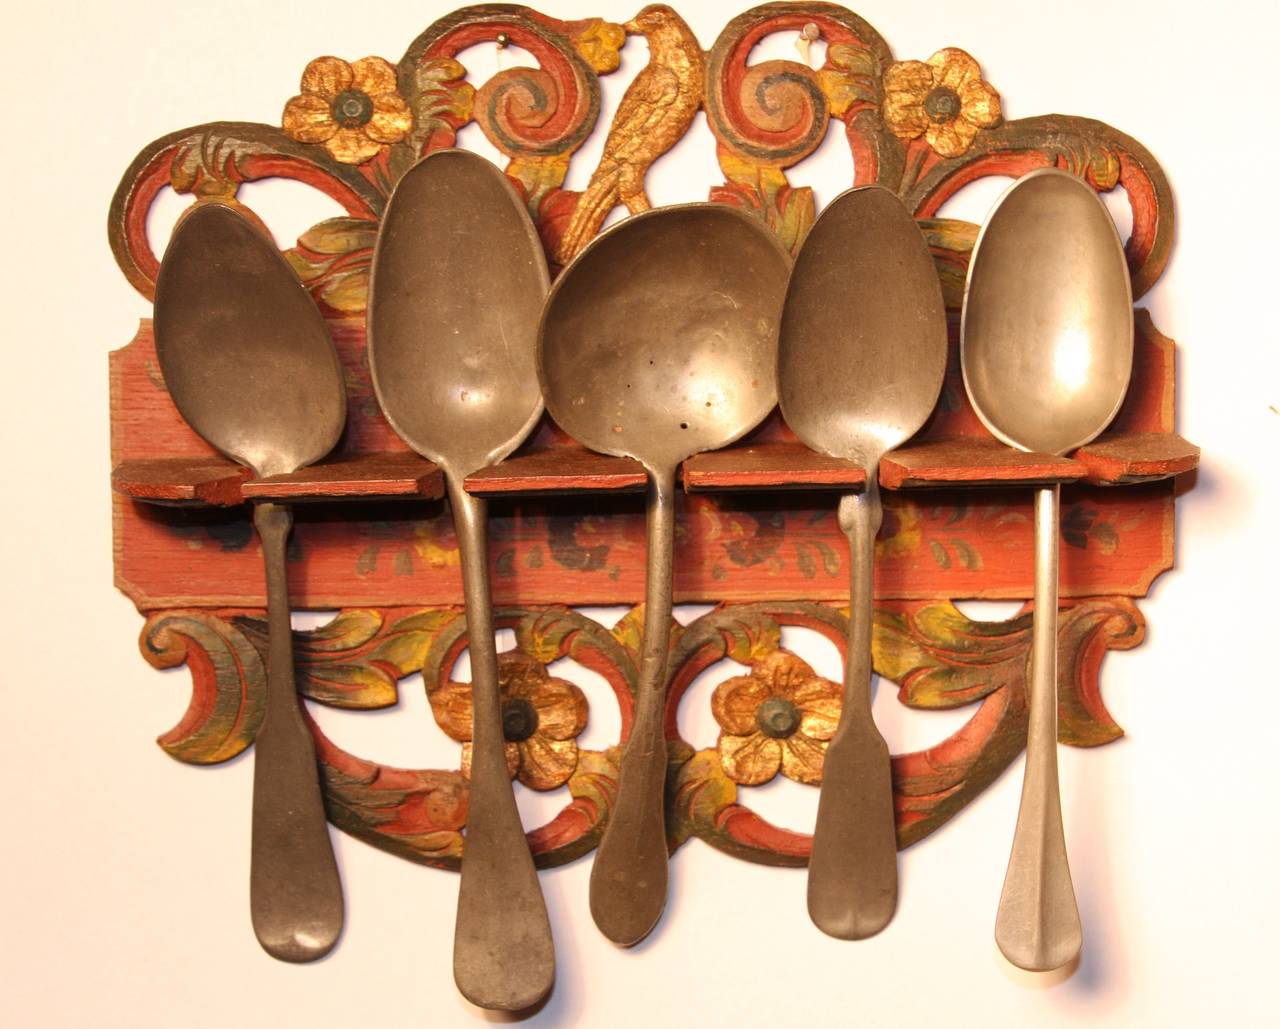 Wonderful, hand painted 19th-century hanging spoon rack with bird and floral decoration.  Red painted background with gold, green, and blue decoration.  Includes 5 pewter spoons from the early 19th century, some stamped OSV.